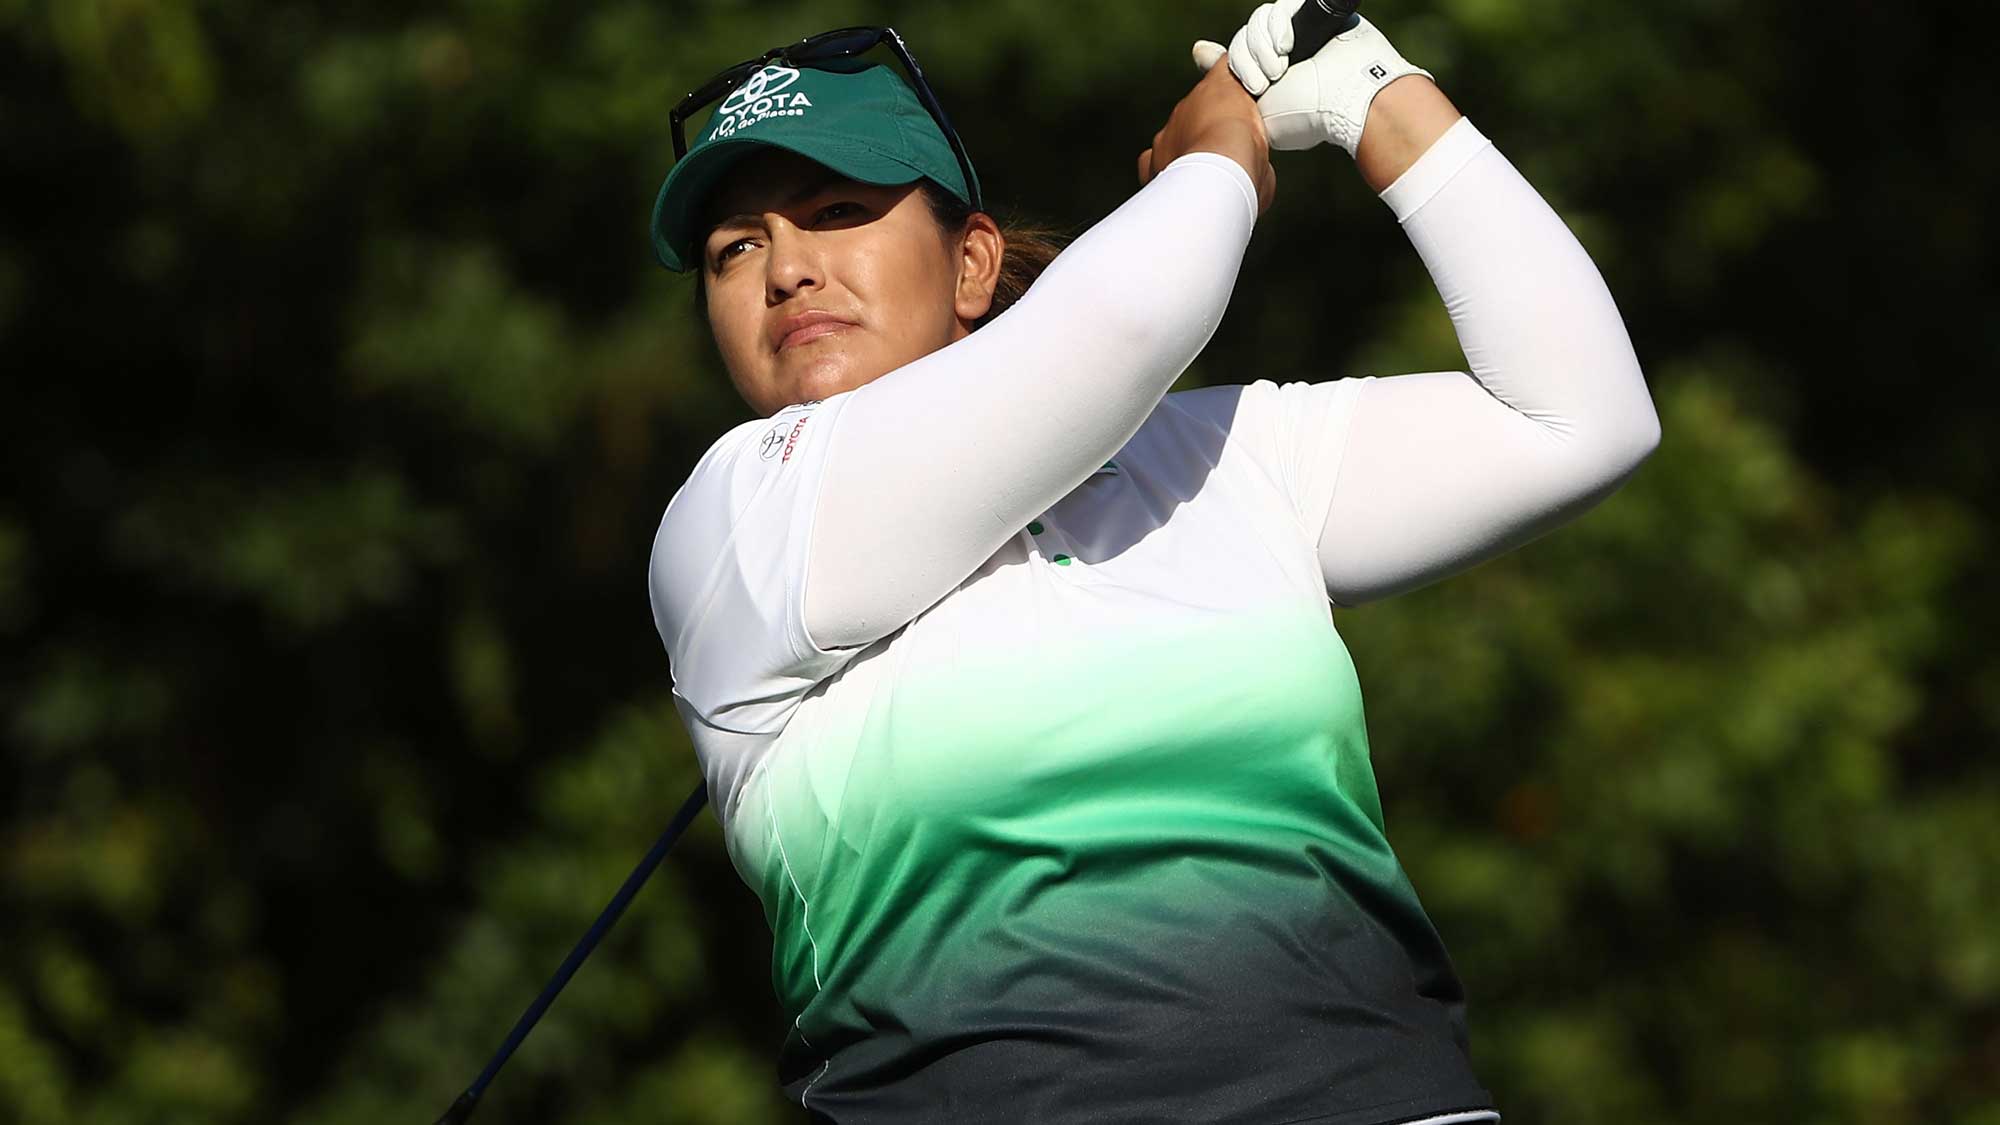 Lizette Salas tees off on the seventh hole during the first round of the CME Group Tour Championship at Tiburon Golf Club